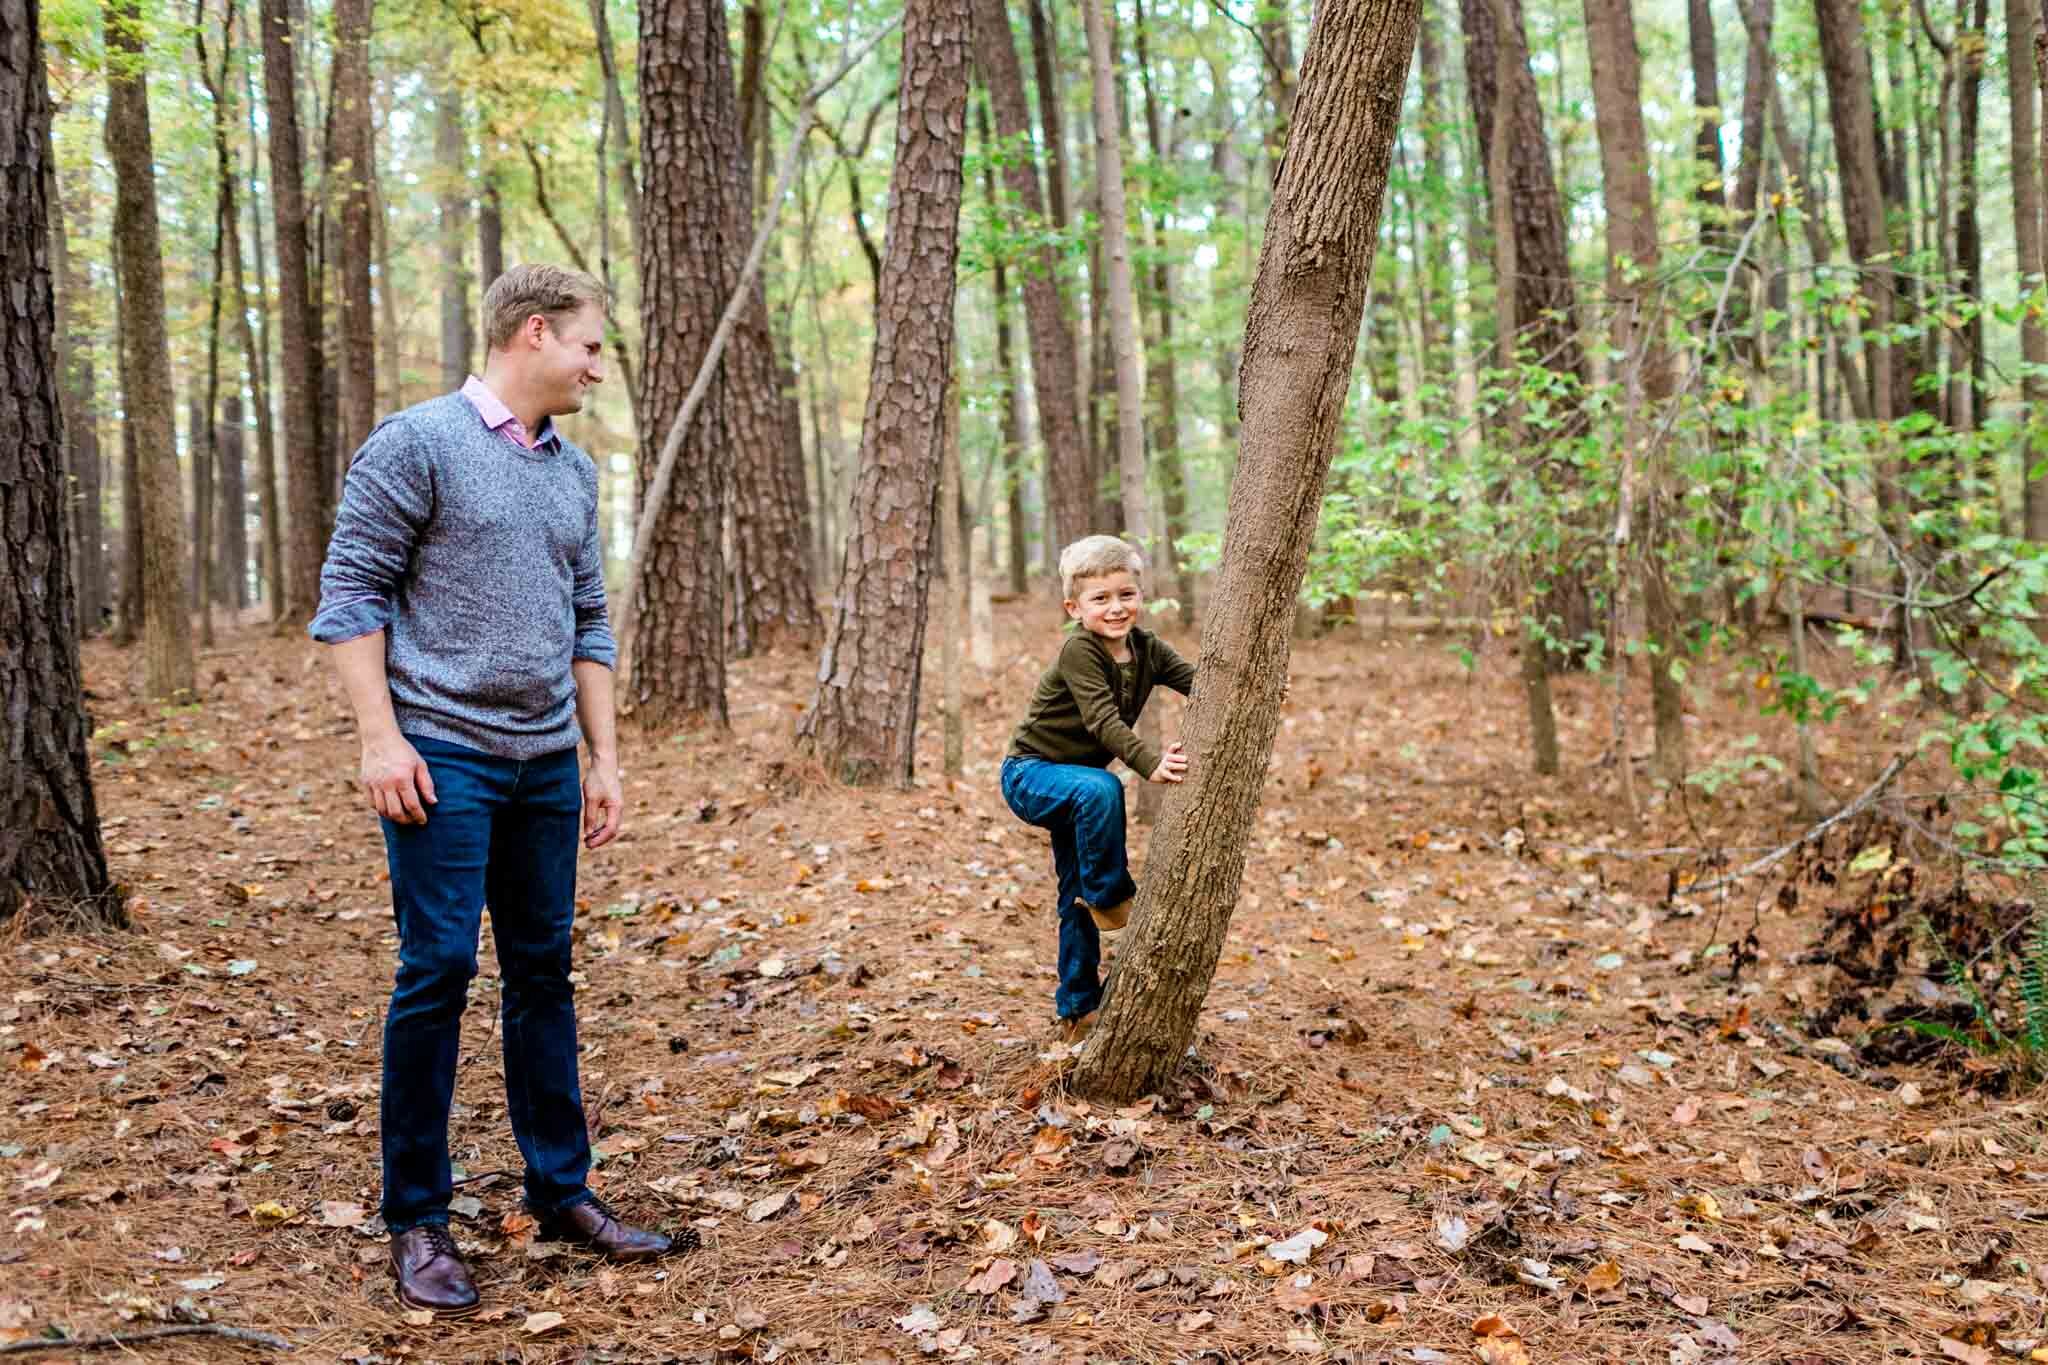 Raleigh Family Photographer at Umstead Park | By G. Lin Photography | Young boy climbing tree